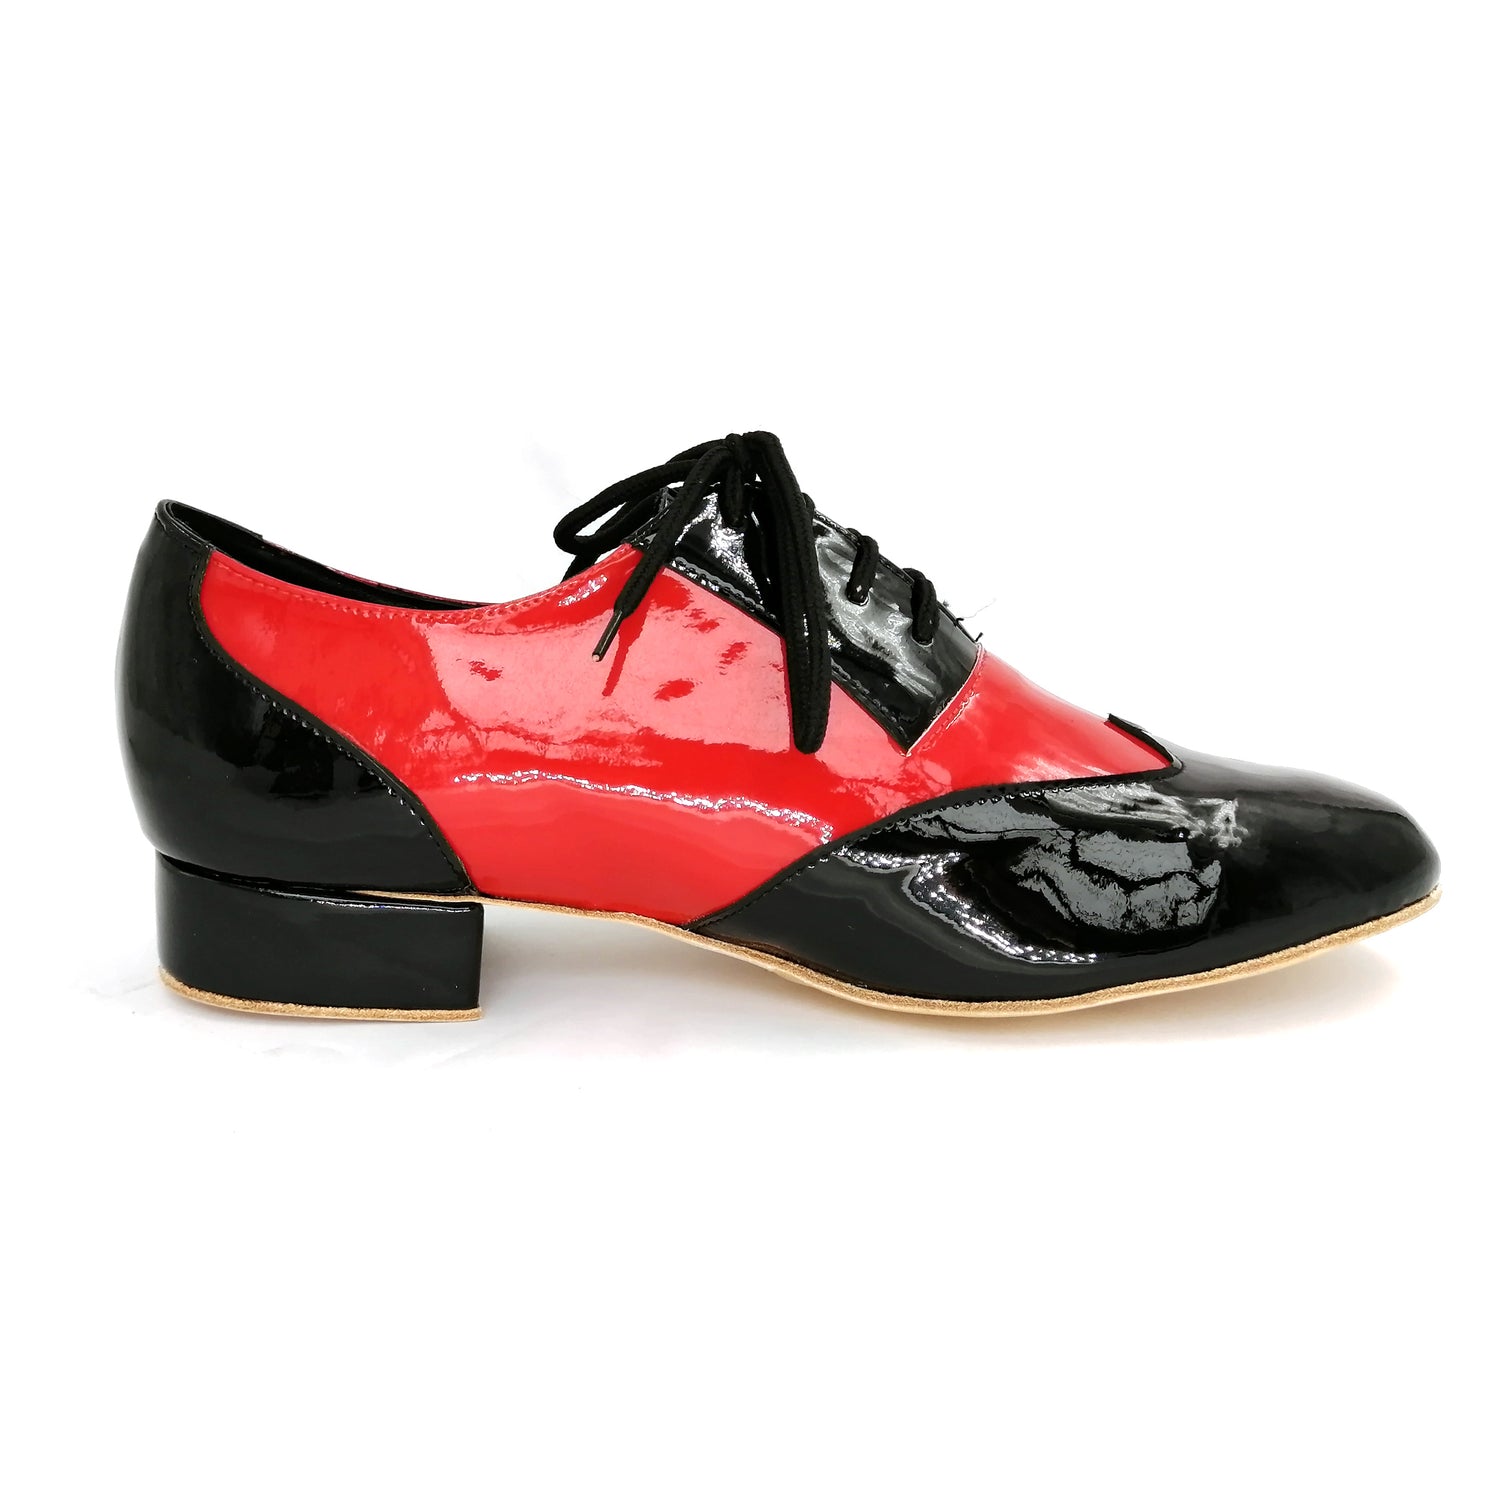 Pro Dancer Men's Tango Shoes with 1 inch Heel Leather Lace-up in Red and Black6